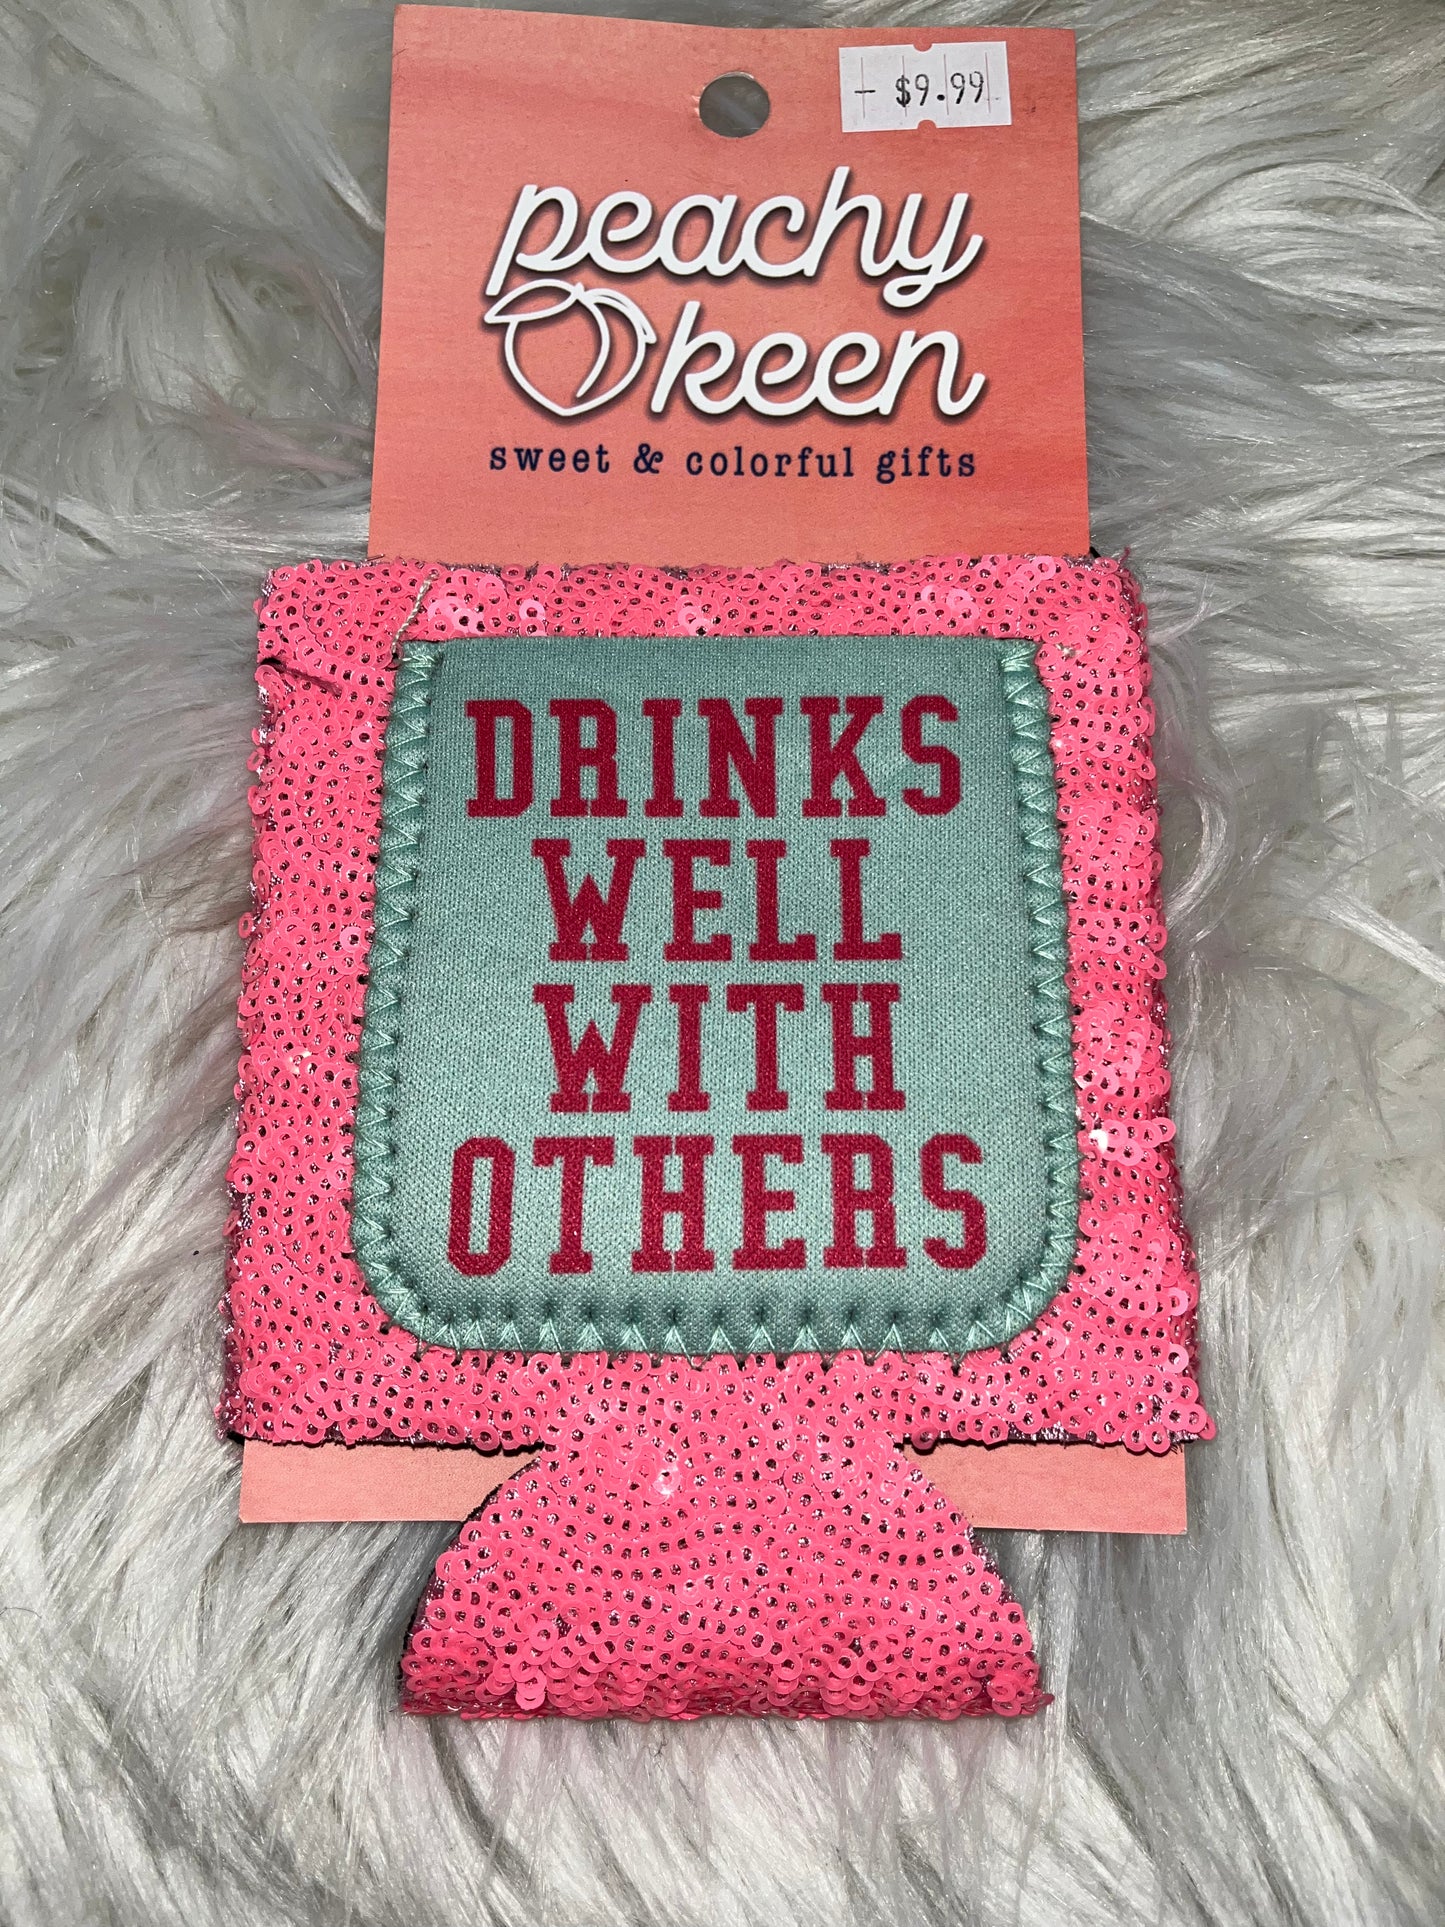 Drinks Well With Others koozie